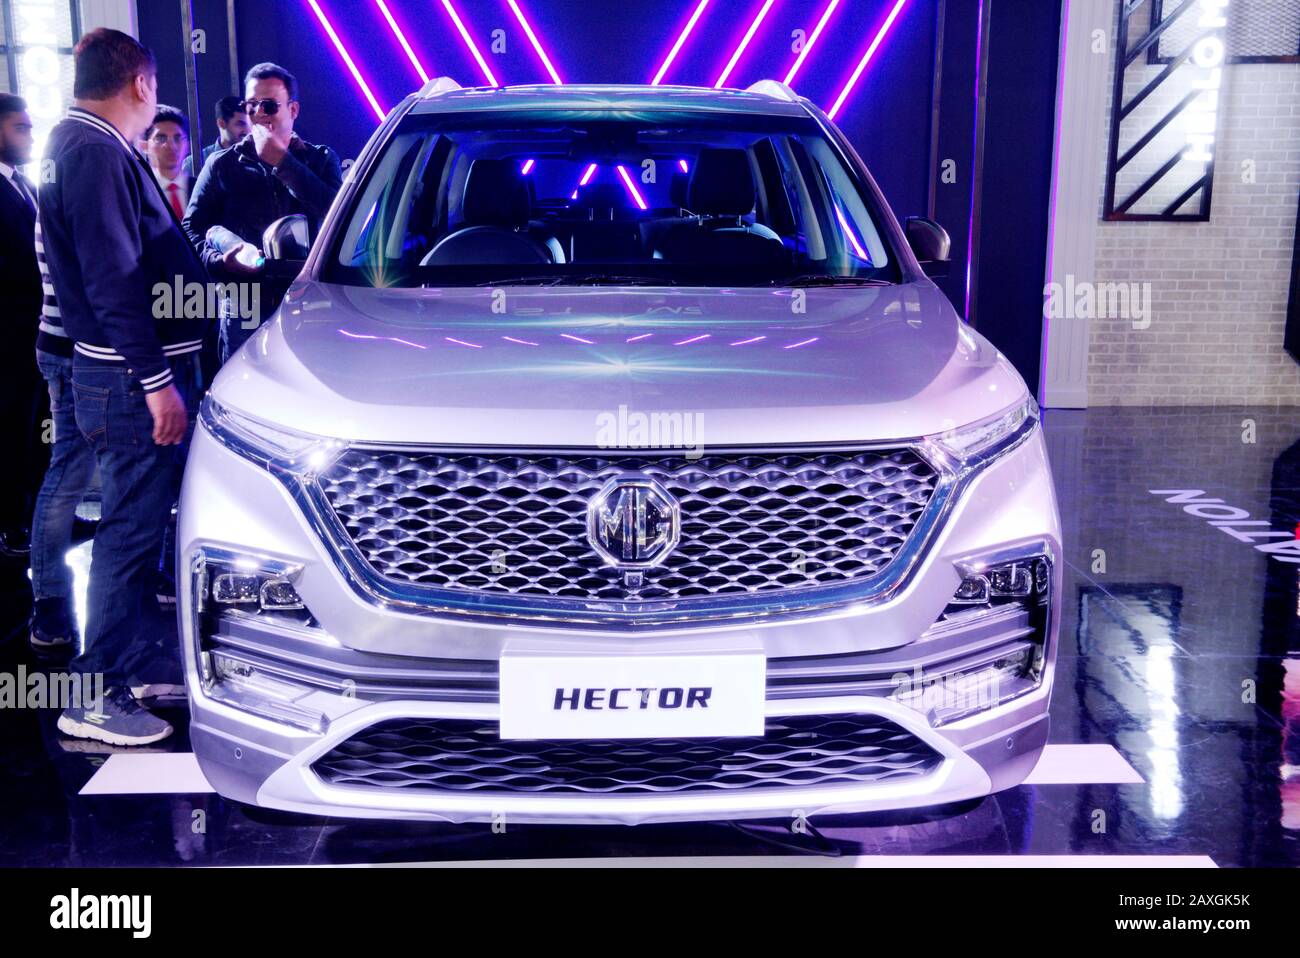 GREATER NOIDA, INDIA – FEBRUARY 7, 2020: Visitors check out the MG Hector car on display at Auto Expo 2020 at Greater Noida in India. Stock Photo